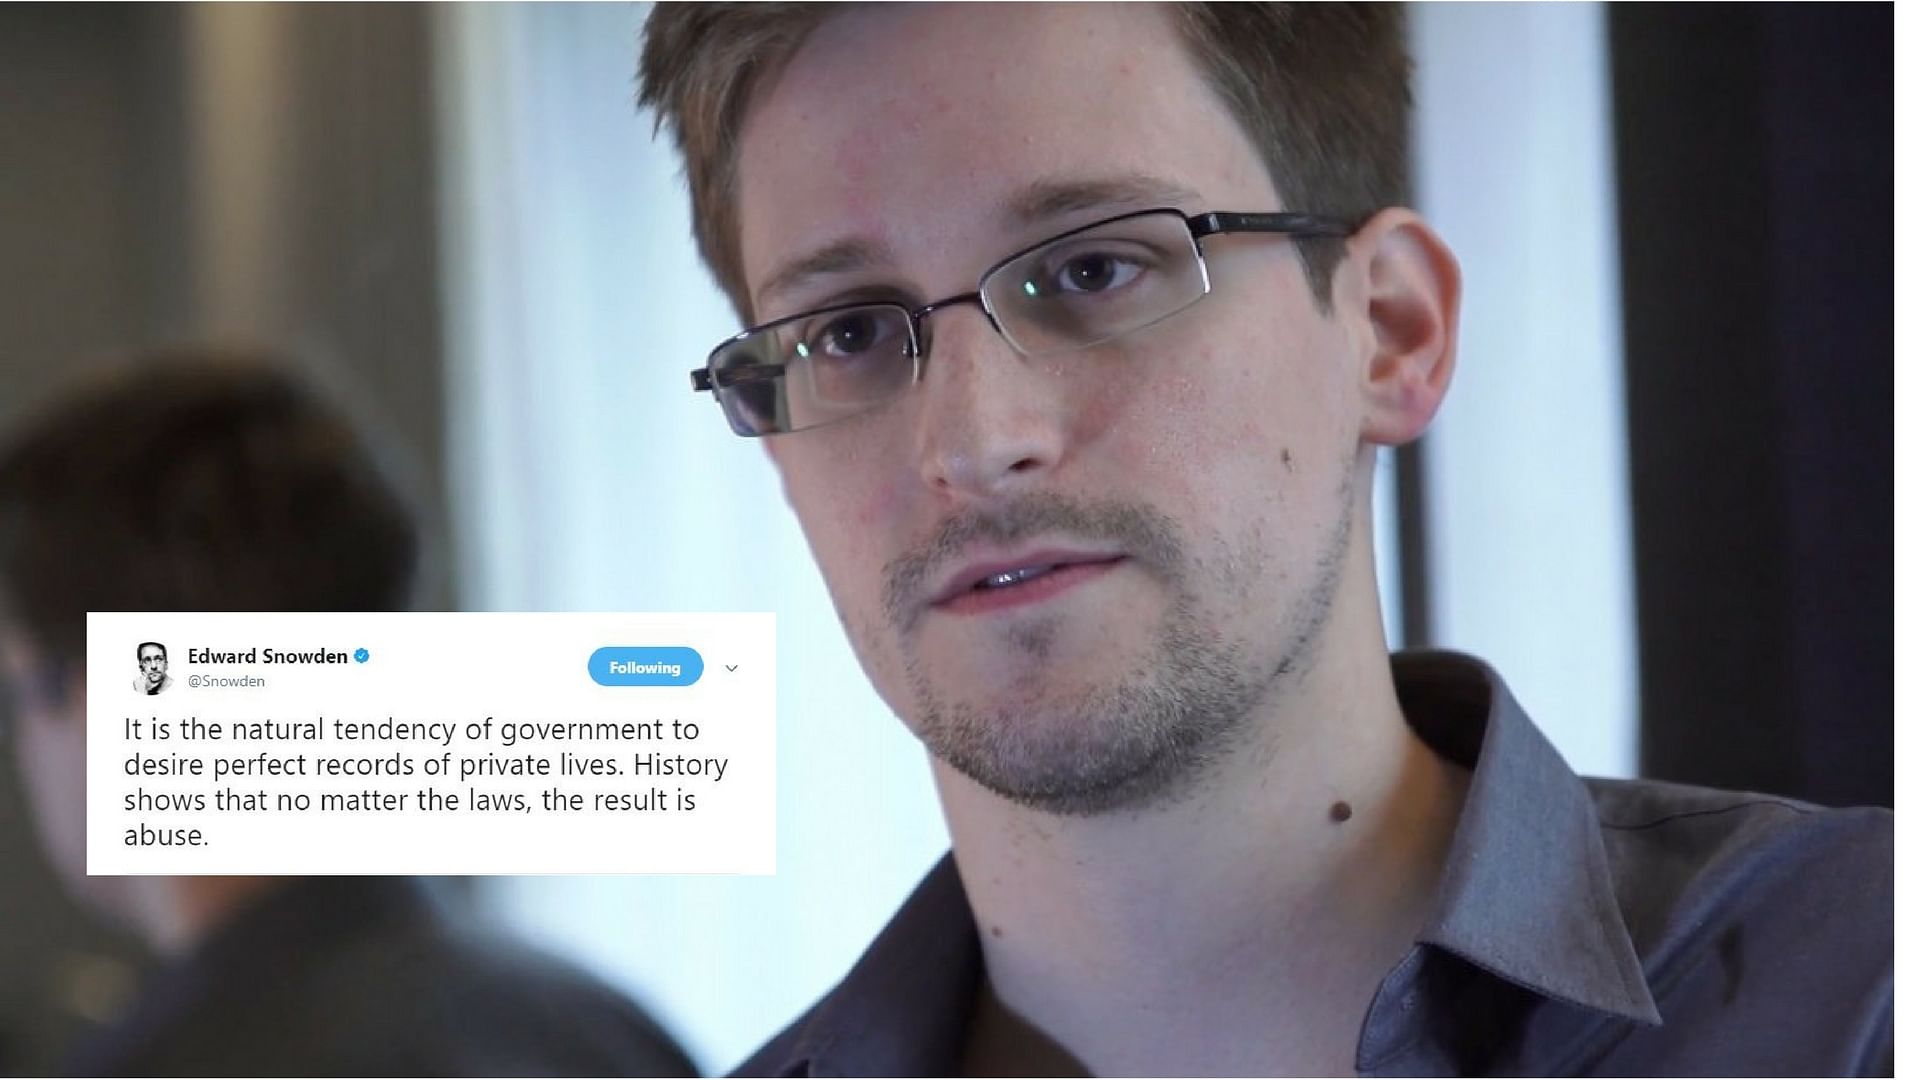 Snowden, a former CIA employee and NSA contractor, made international headlines in 2013 when he revealed secret US surveillance programme details.